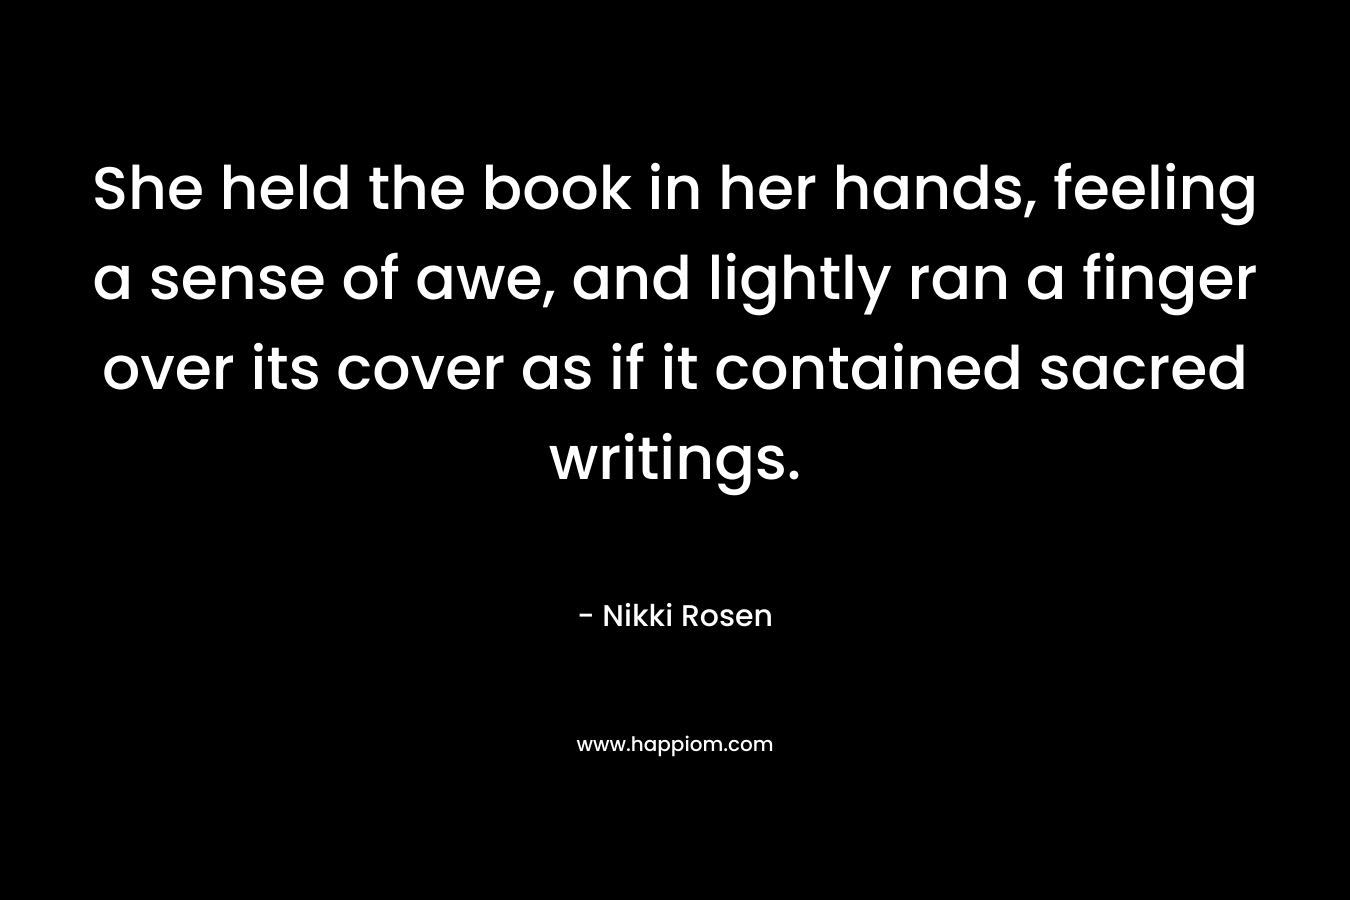 She held the book in her hands, feeling a sense of awe, and lightly ran a finger over its cover as if it contained sacred writings. – Nikki Rosen